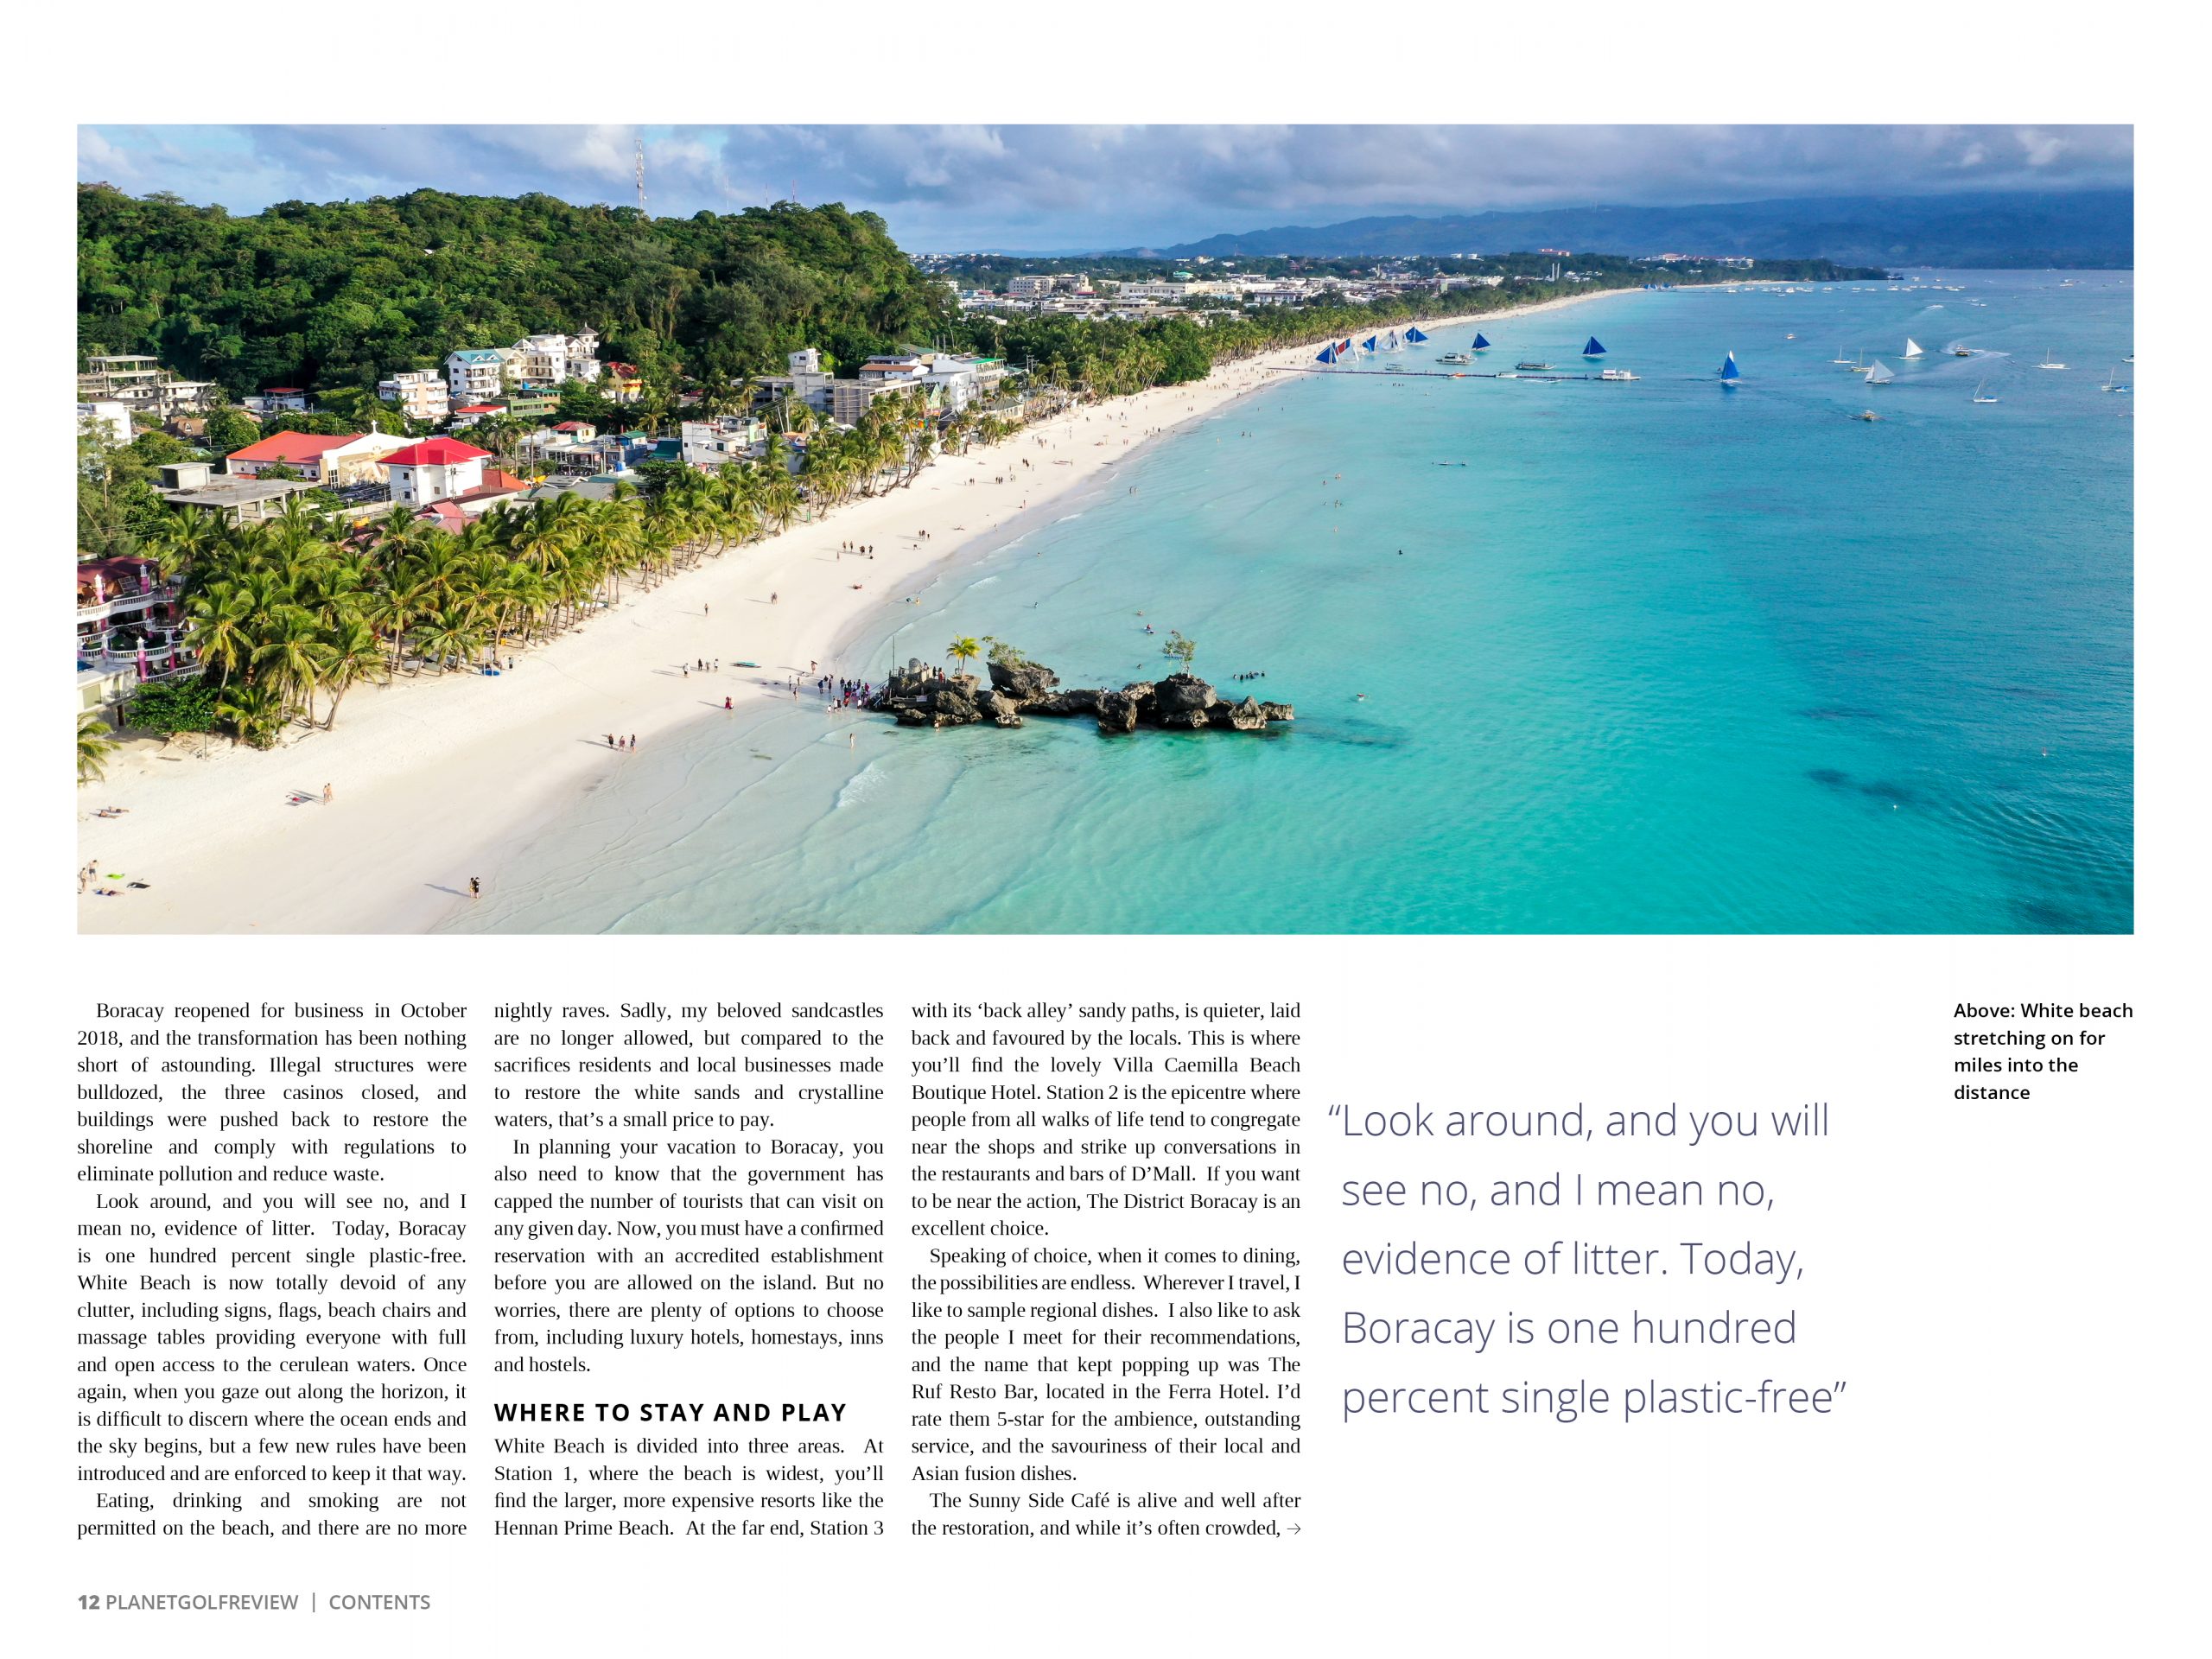 Boracay - Paradise Reclaimed for Planet Golf Review